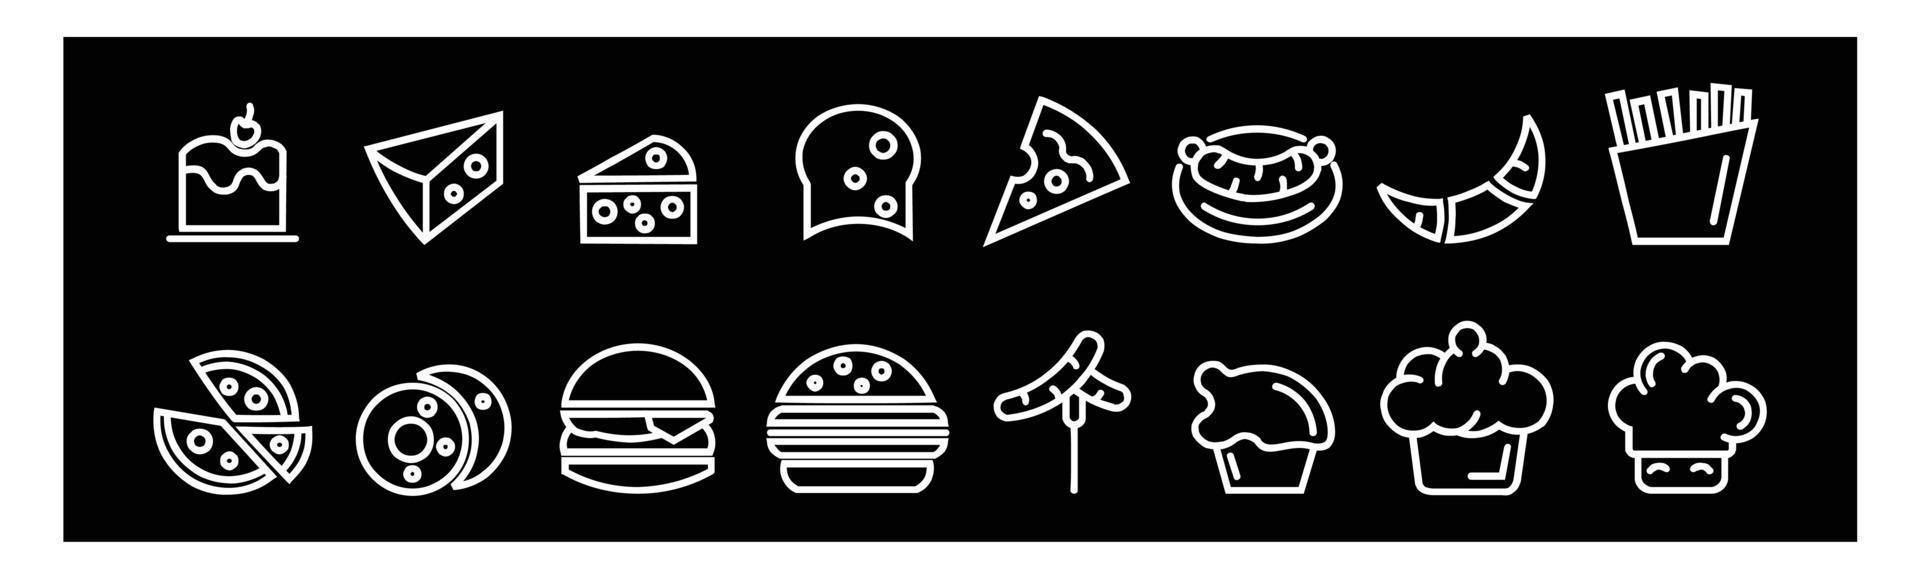 food and drink flat logo icon set,restaurant menu healtyhy  icons for design on black background. vector